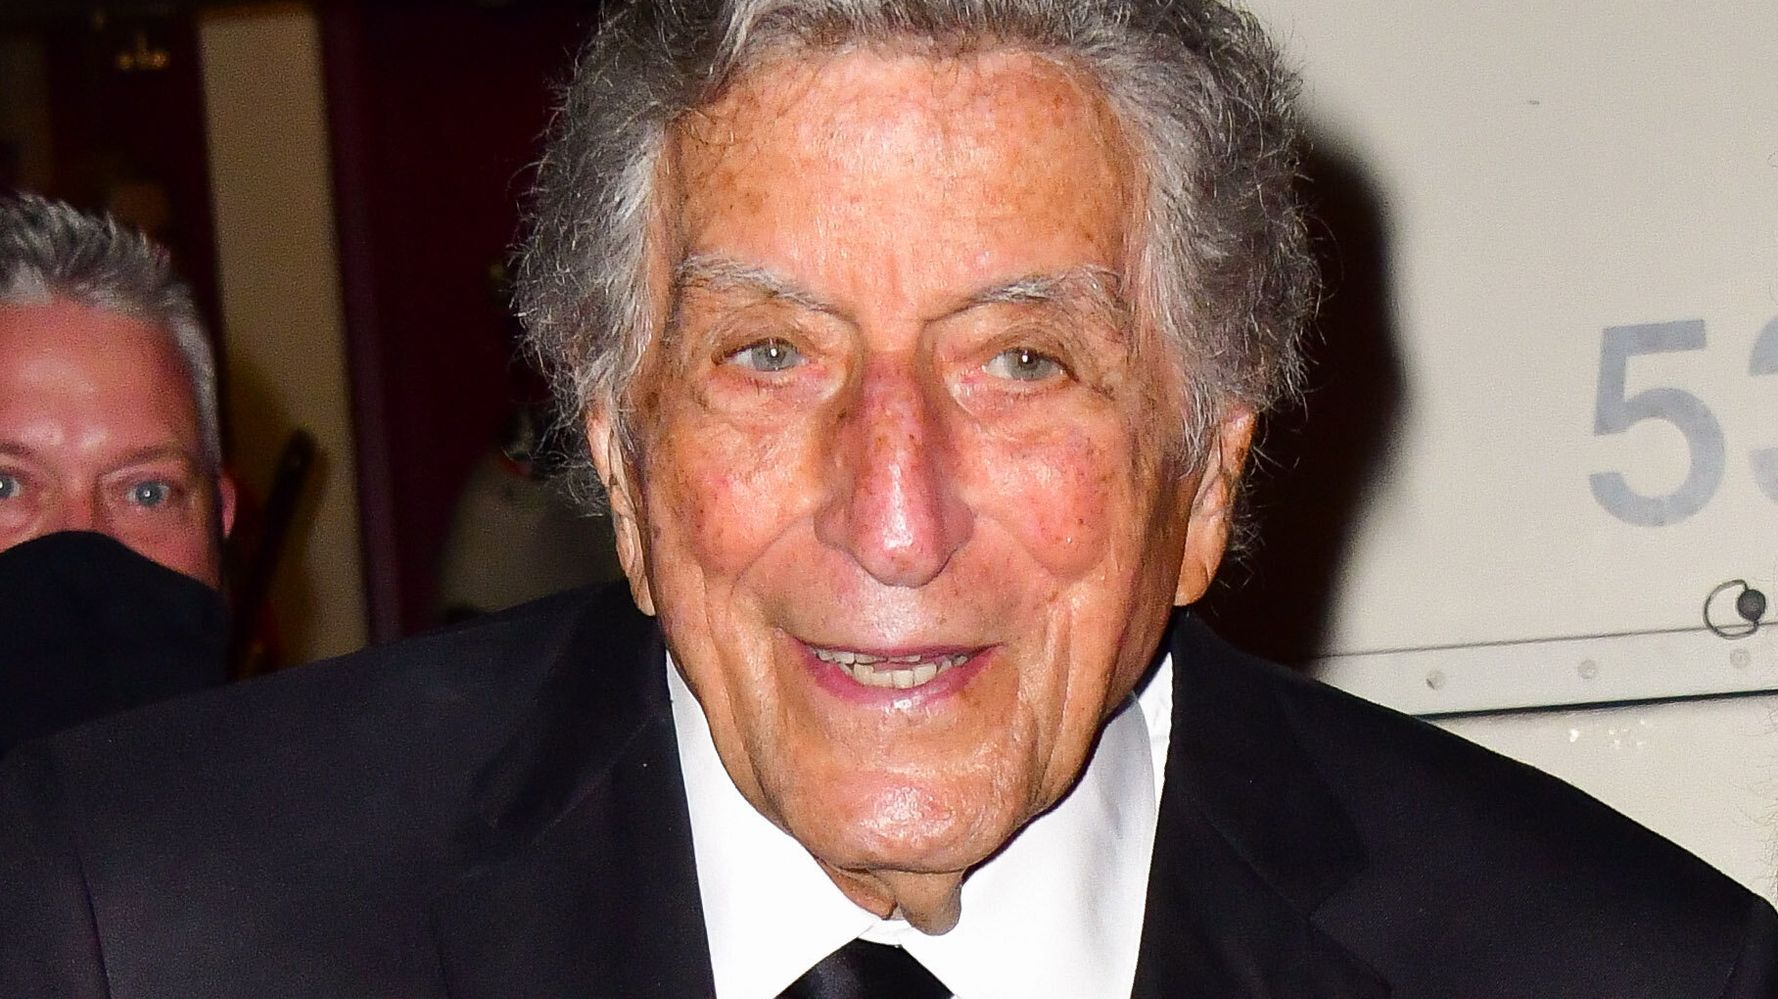 Tony Bennett Retires From Concerts At The Tender Age Of 95